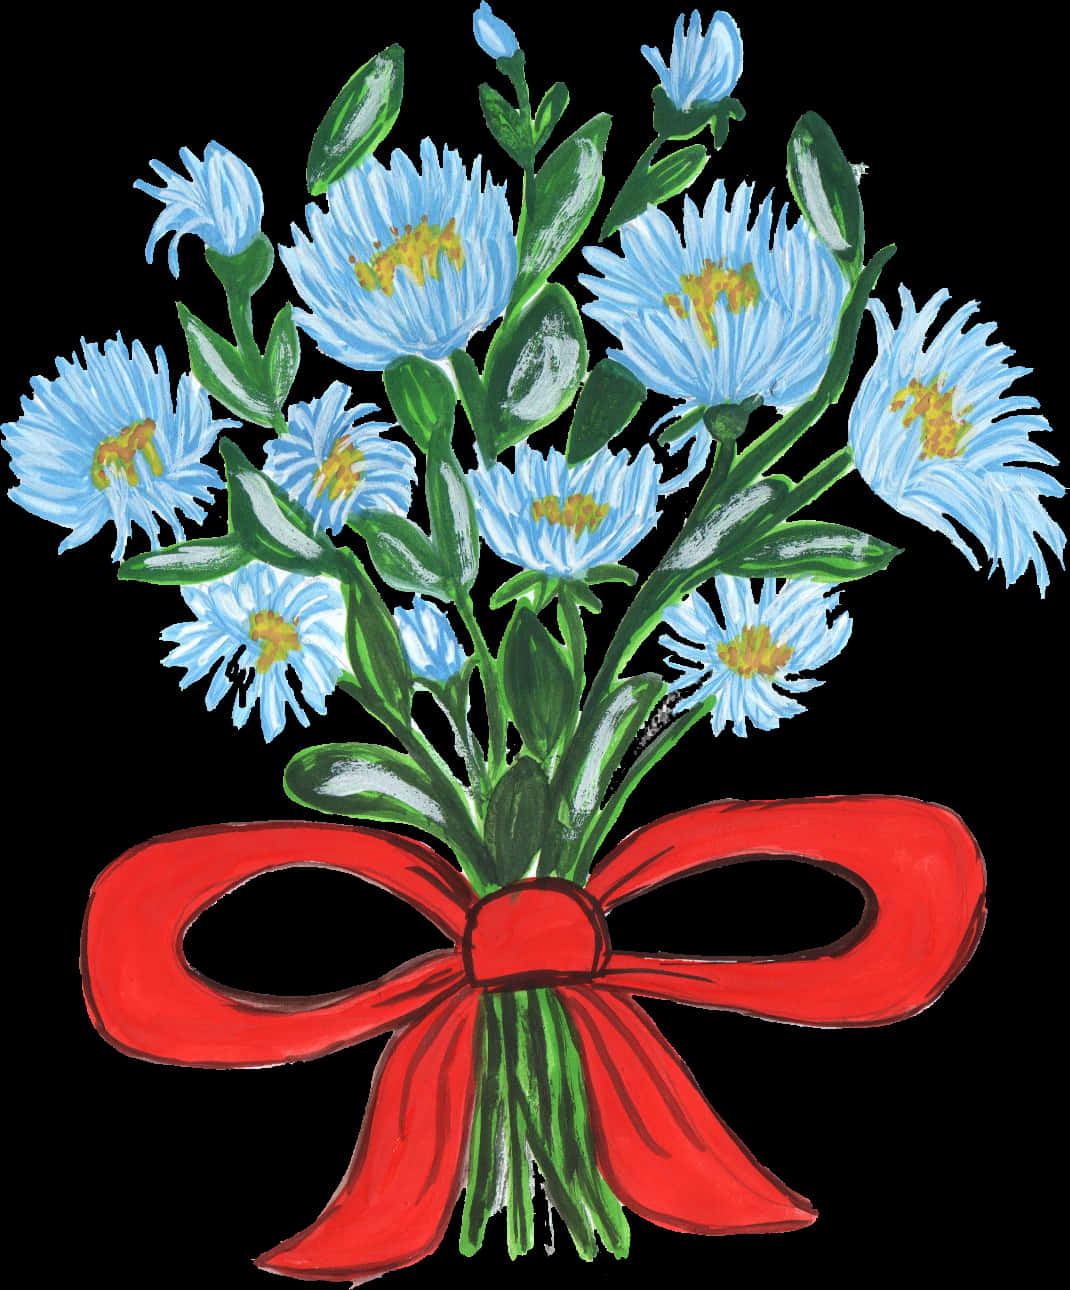 A Bouquet Of Flowers With A Red Bow